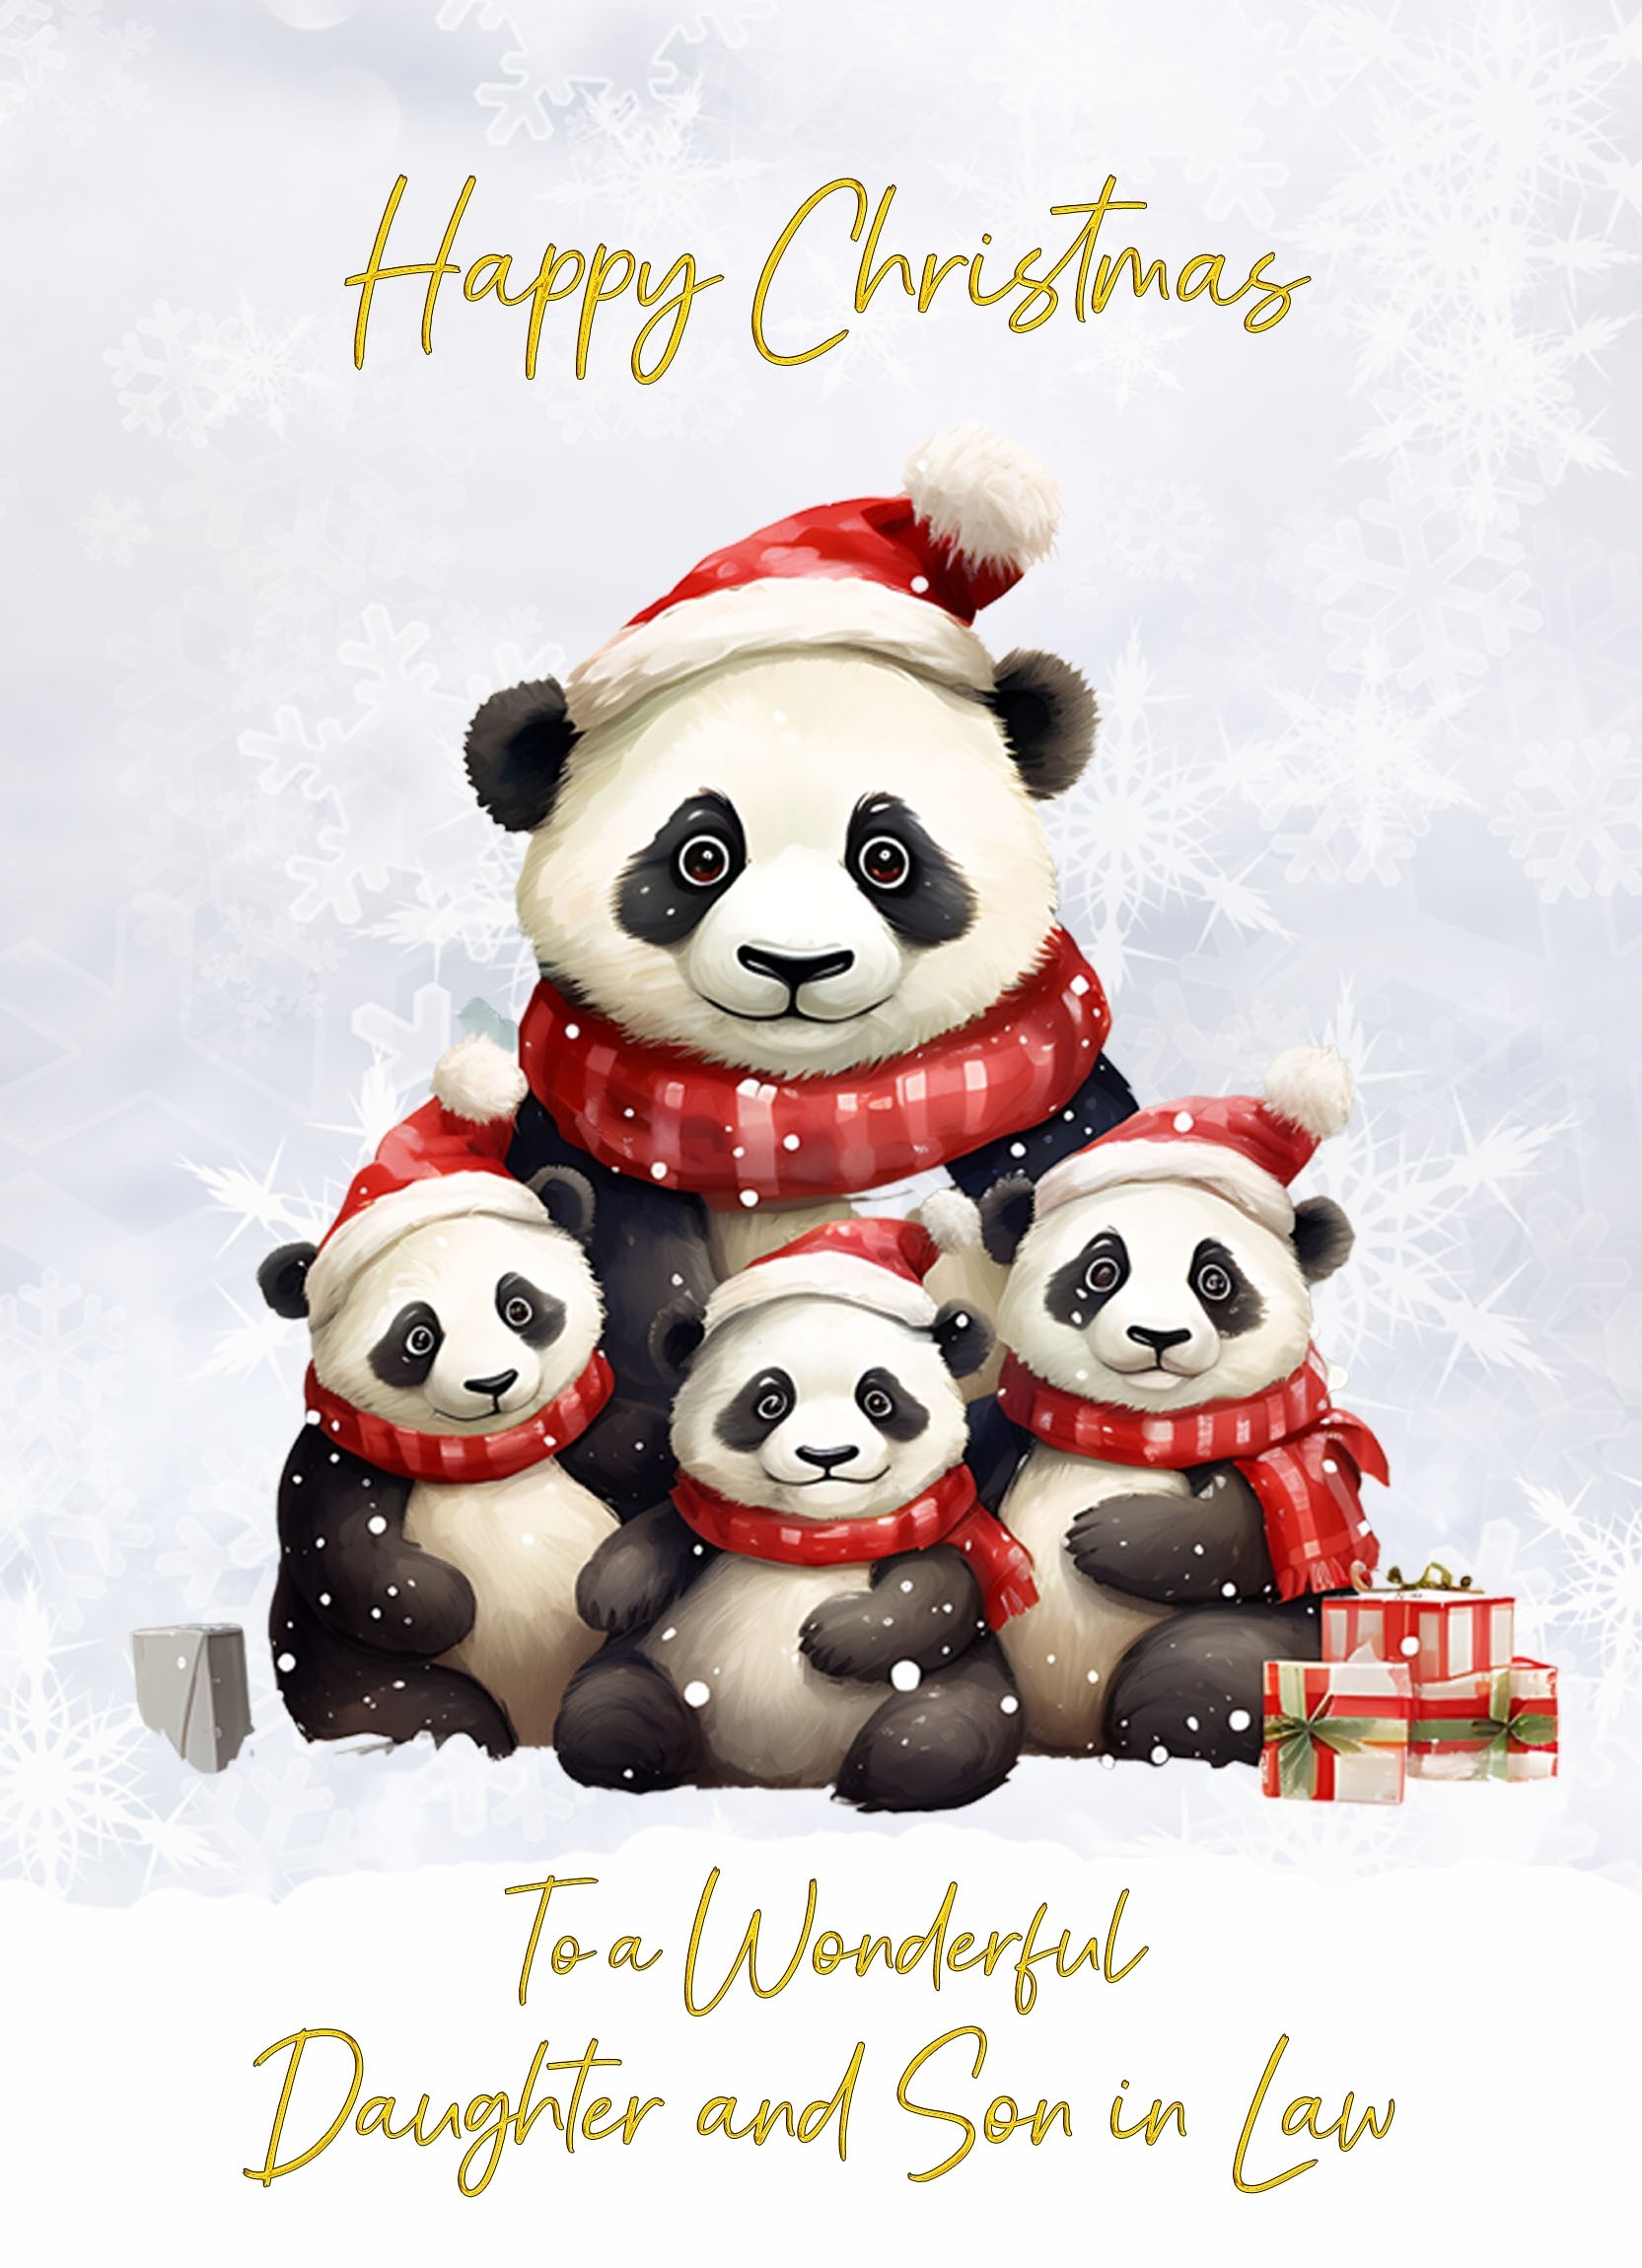 Christmas Card For Daughter and Son in Law (Panda Bear Family Art)